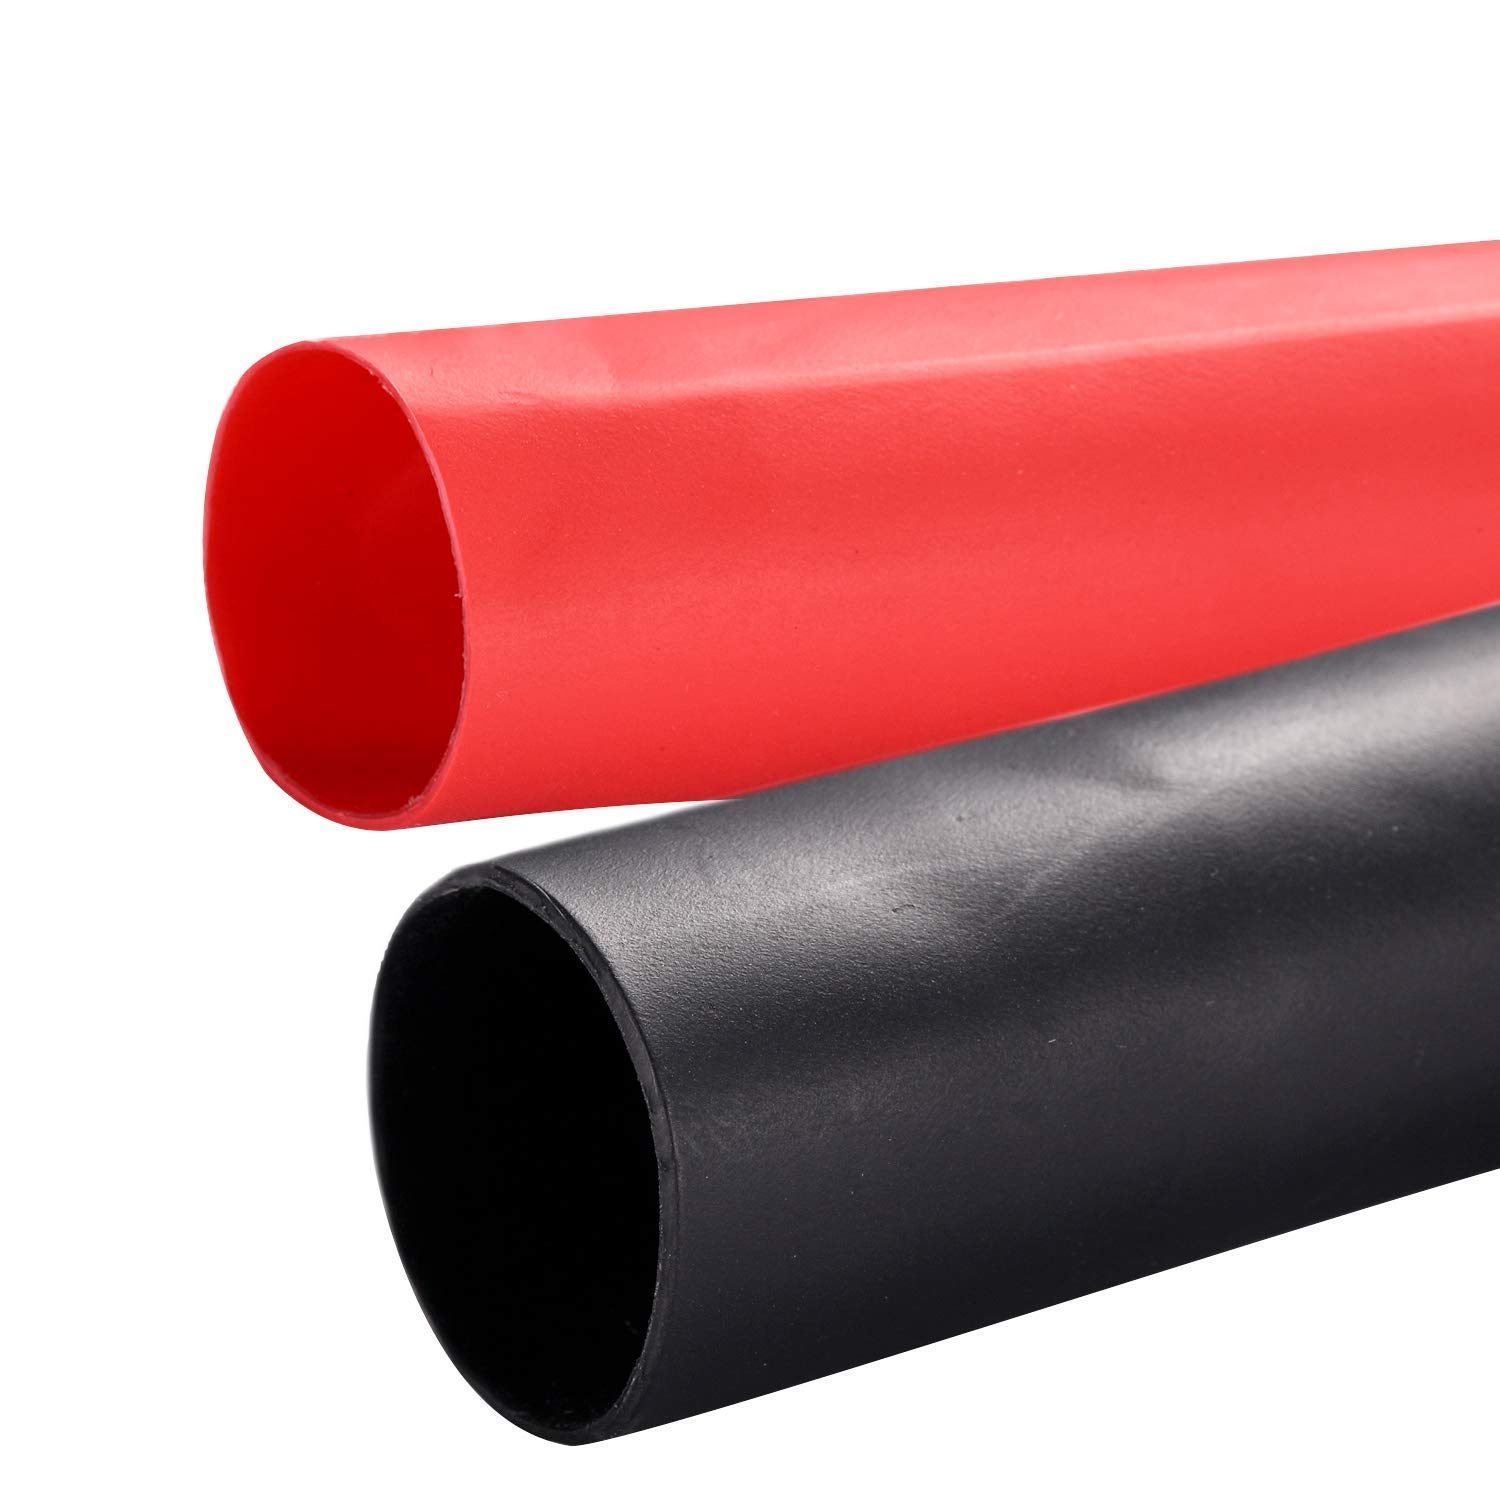 4 ft. piece 3/4" Dia Black Heavy Duty Adhesive-Lined Shrink Tubing 